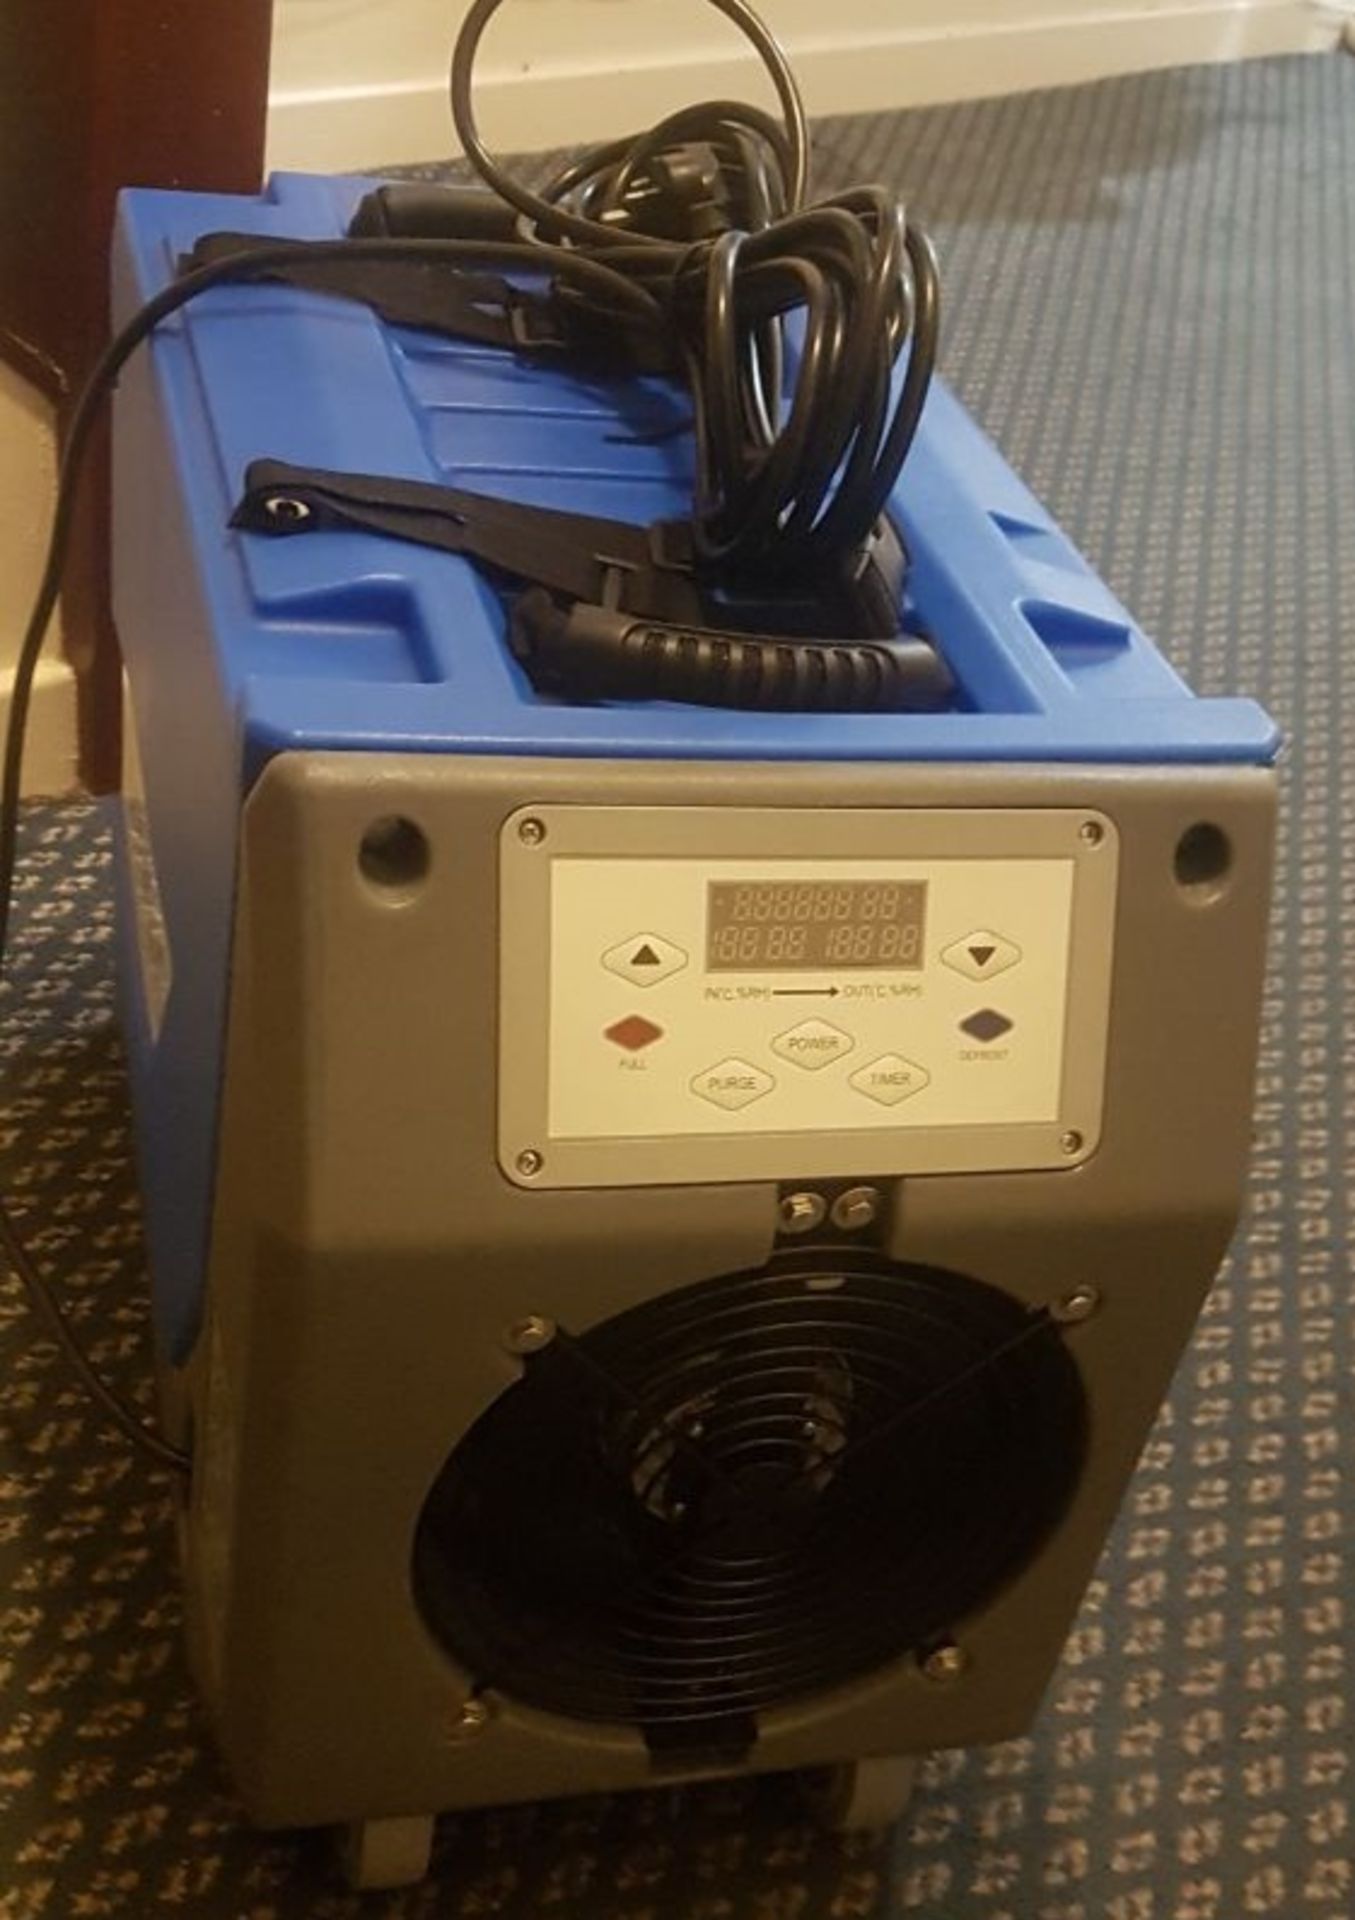 Commercial 85L per day 230V dehumidifier - Image 6 of 6